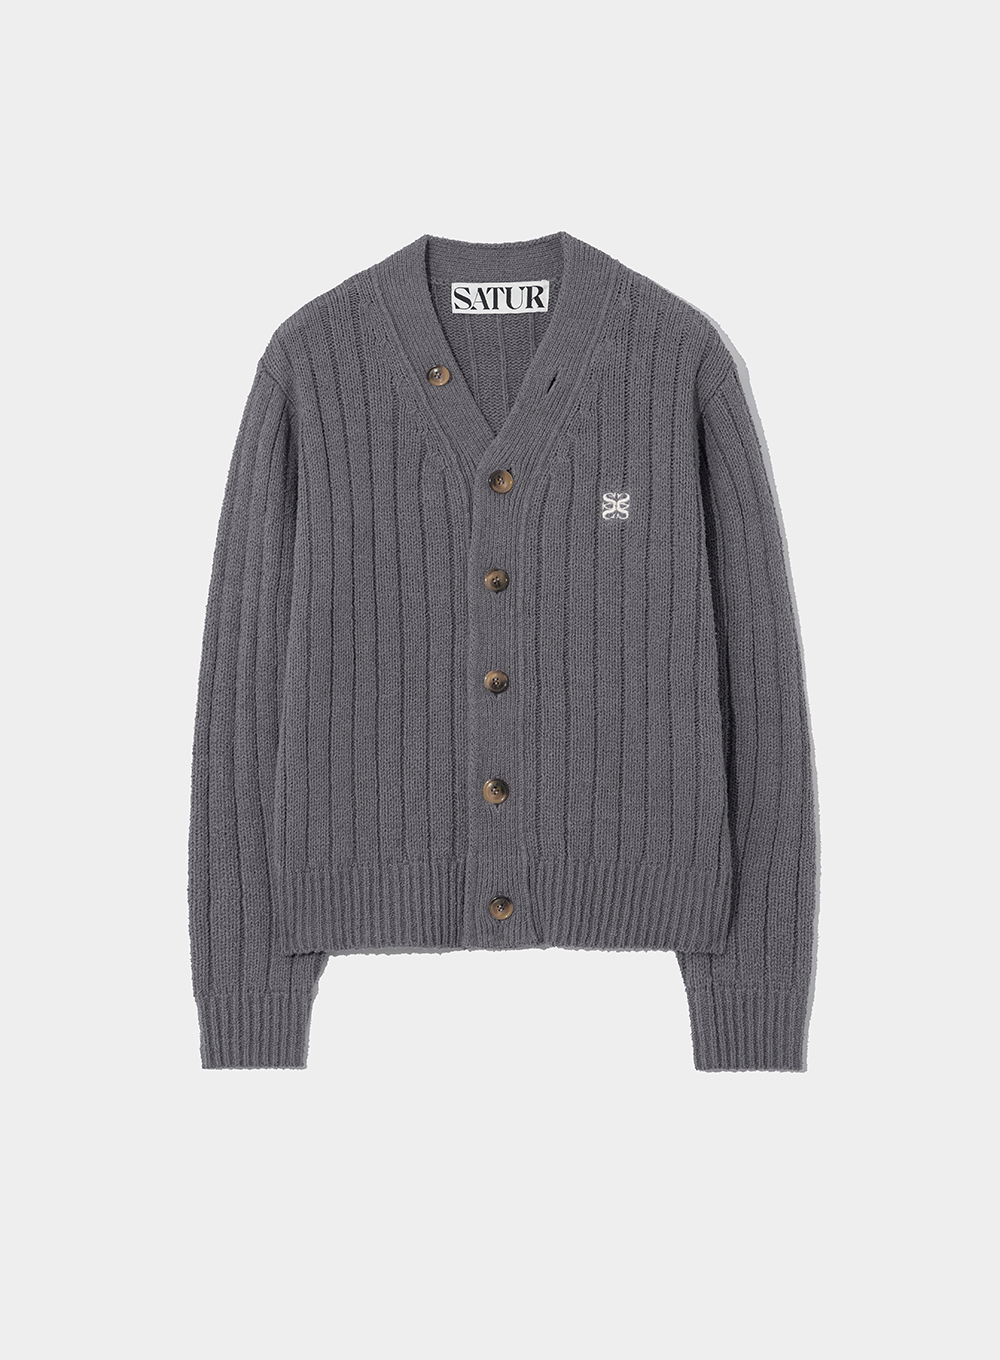 (W)Faro Over Size Boucle Cardigan - Charcoal Gray